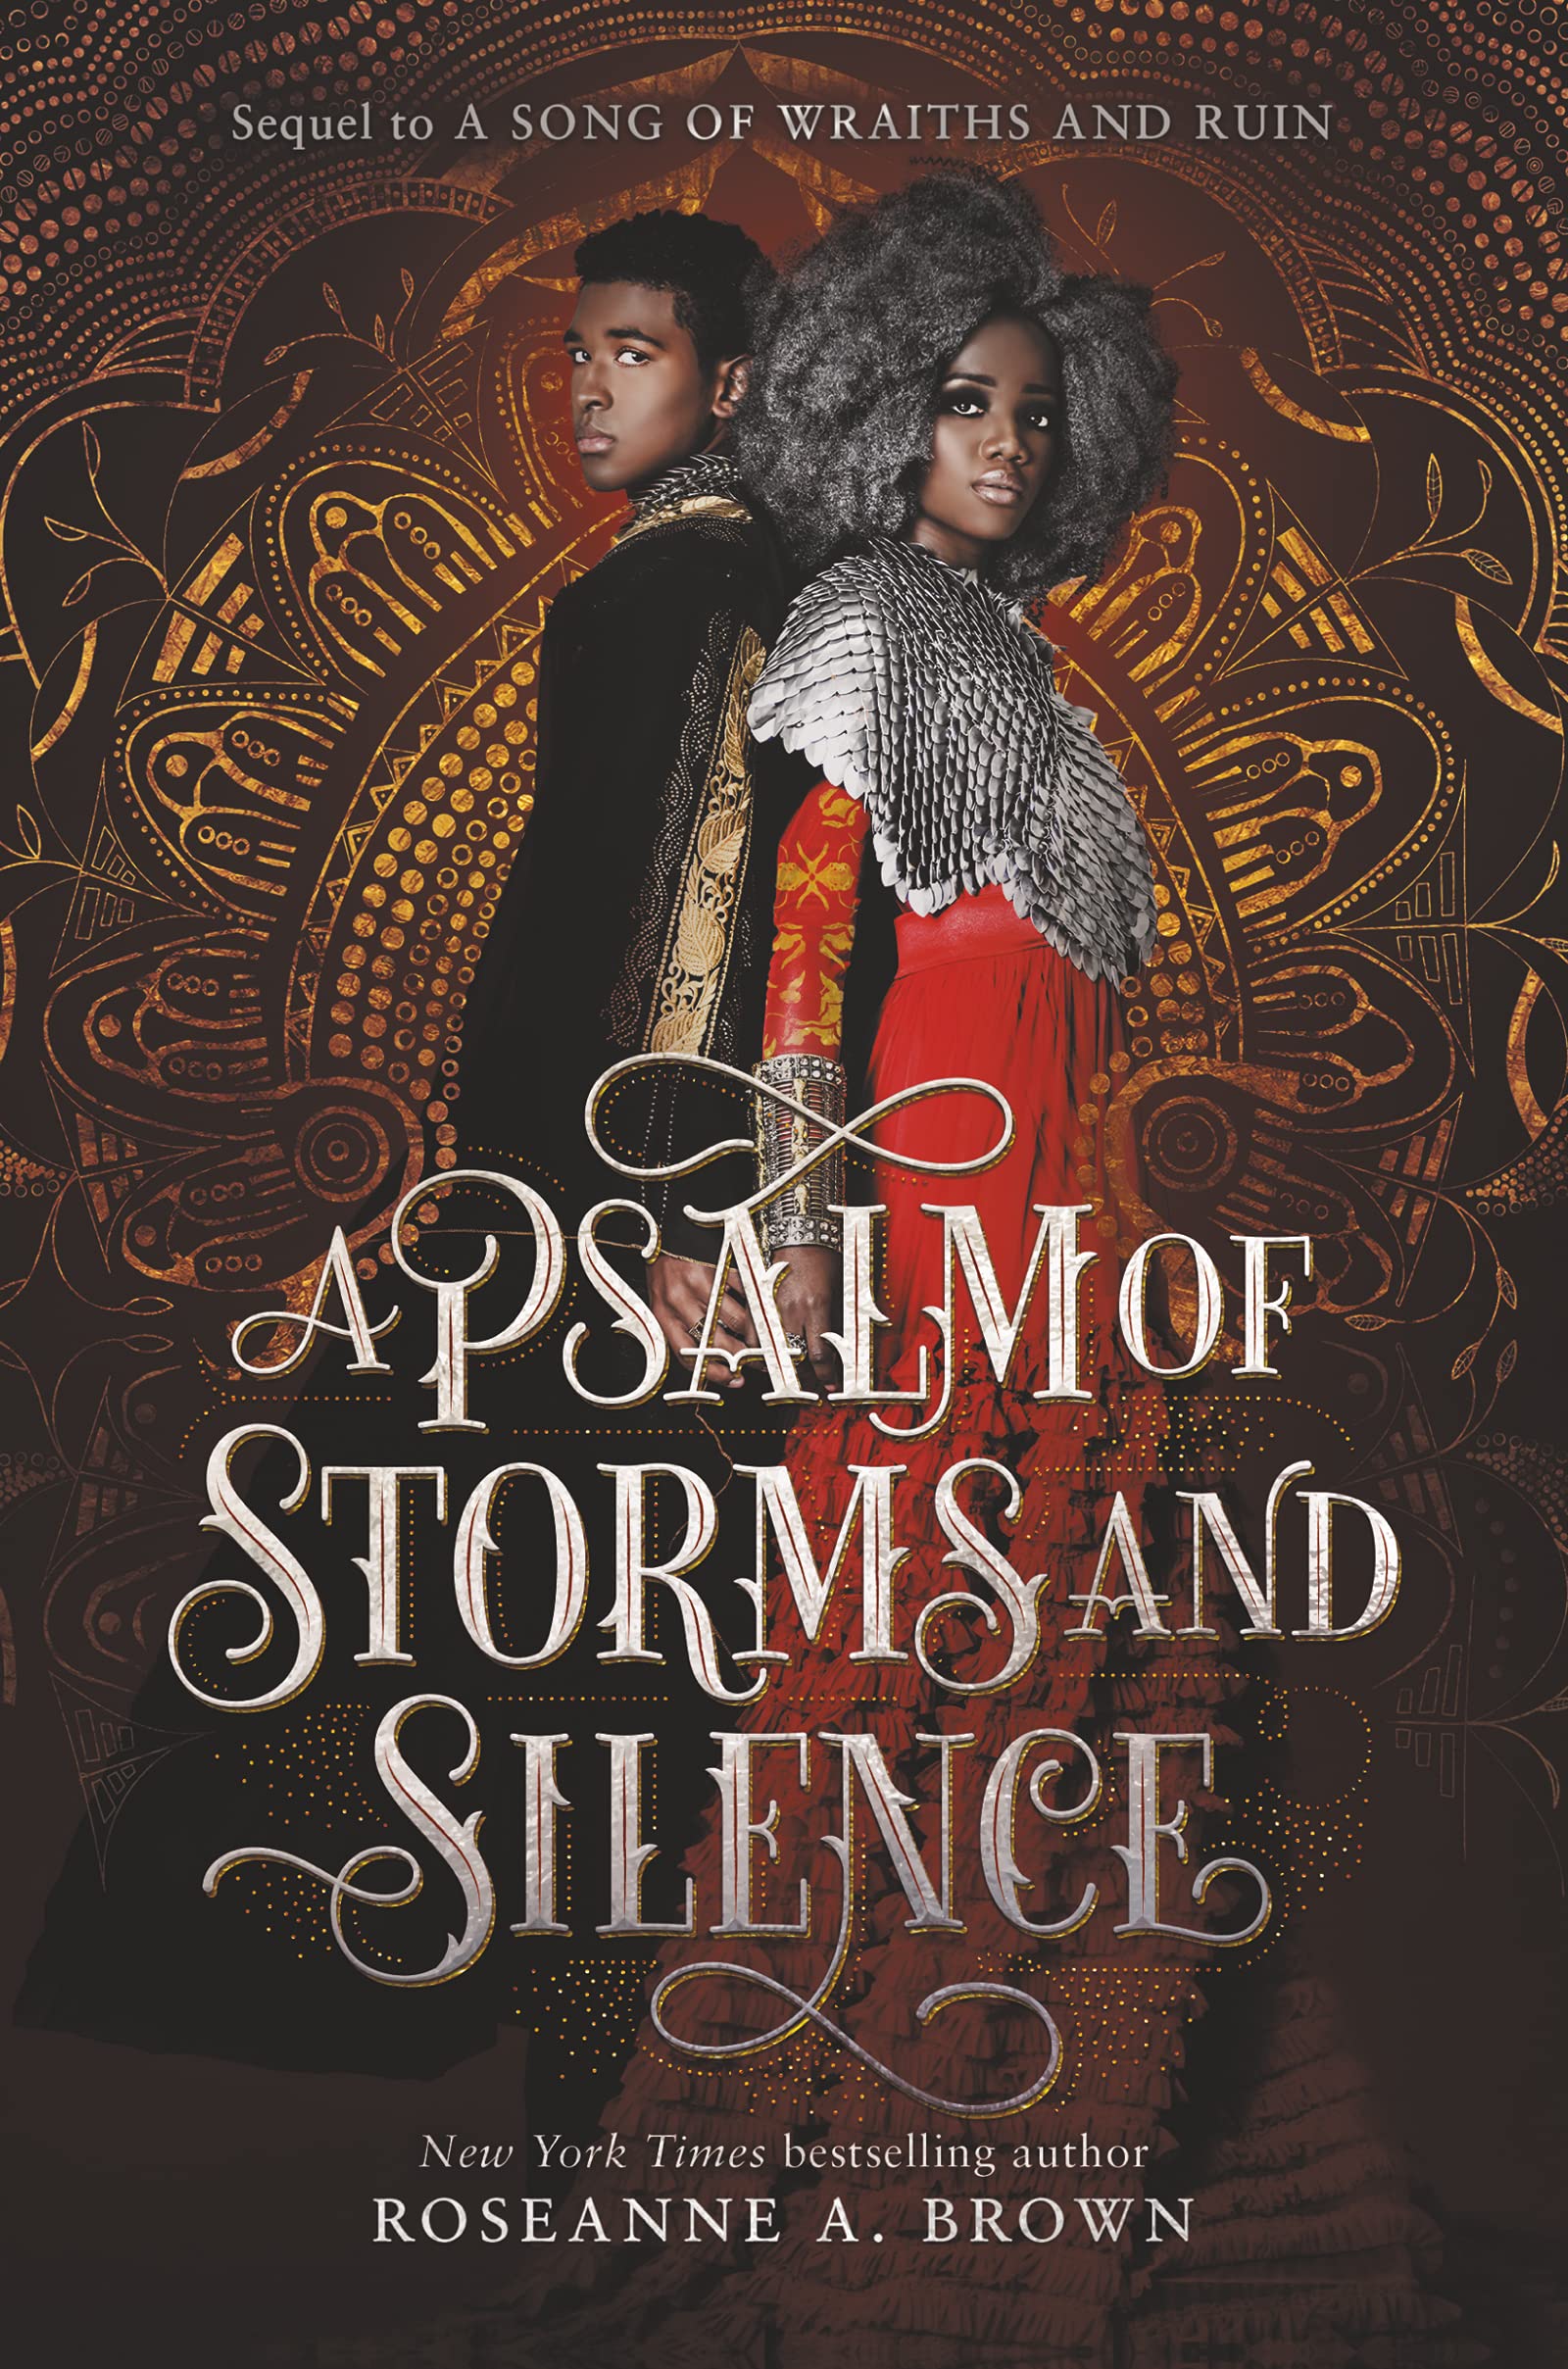 Cover for A Psalm of Storms and Silence by Roseanne A. Brown